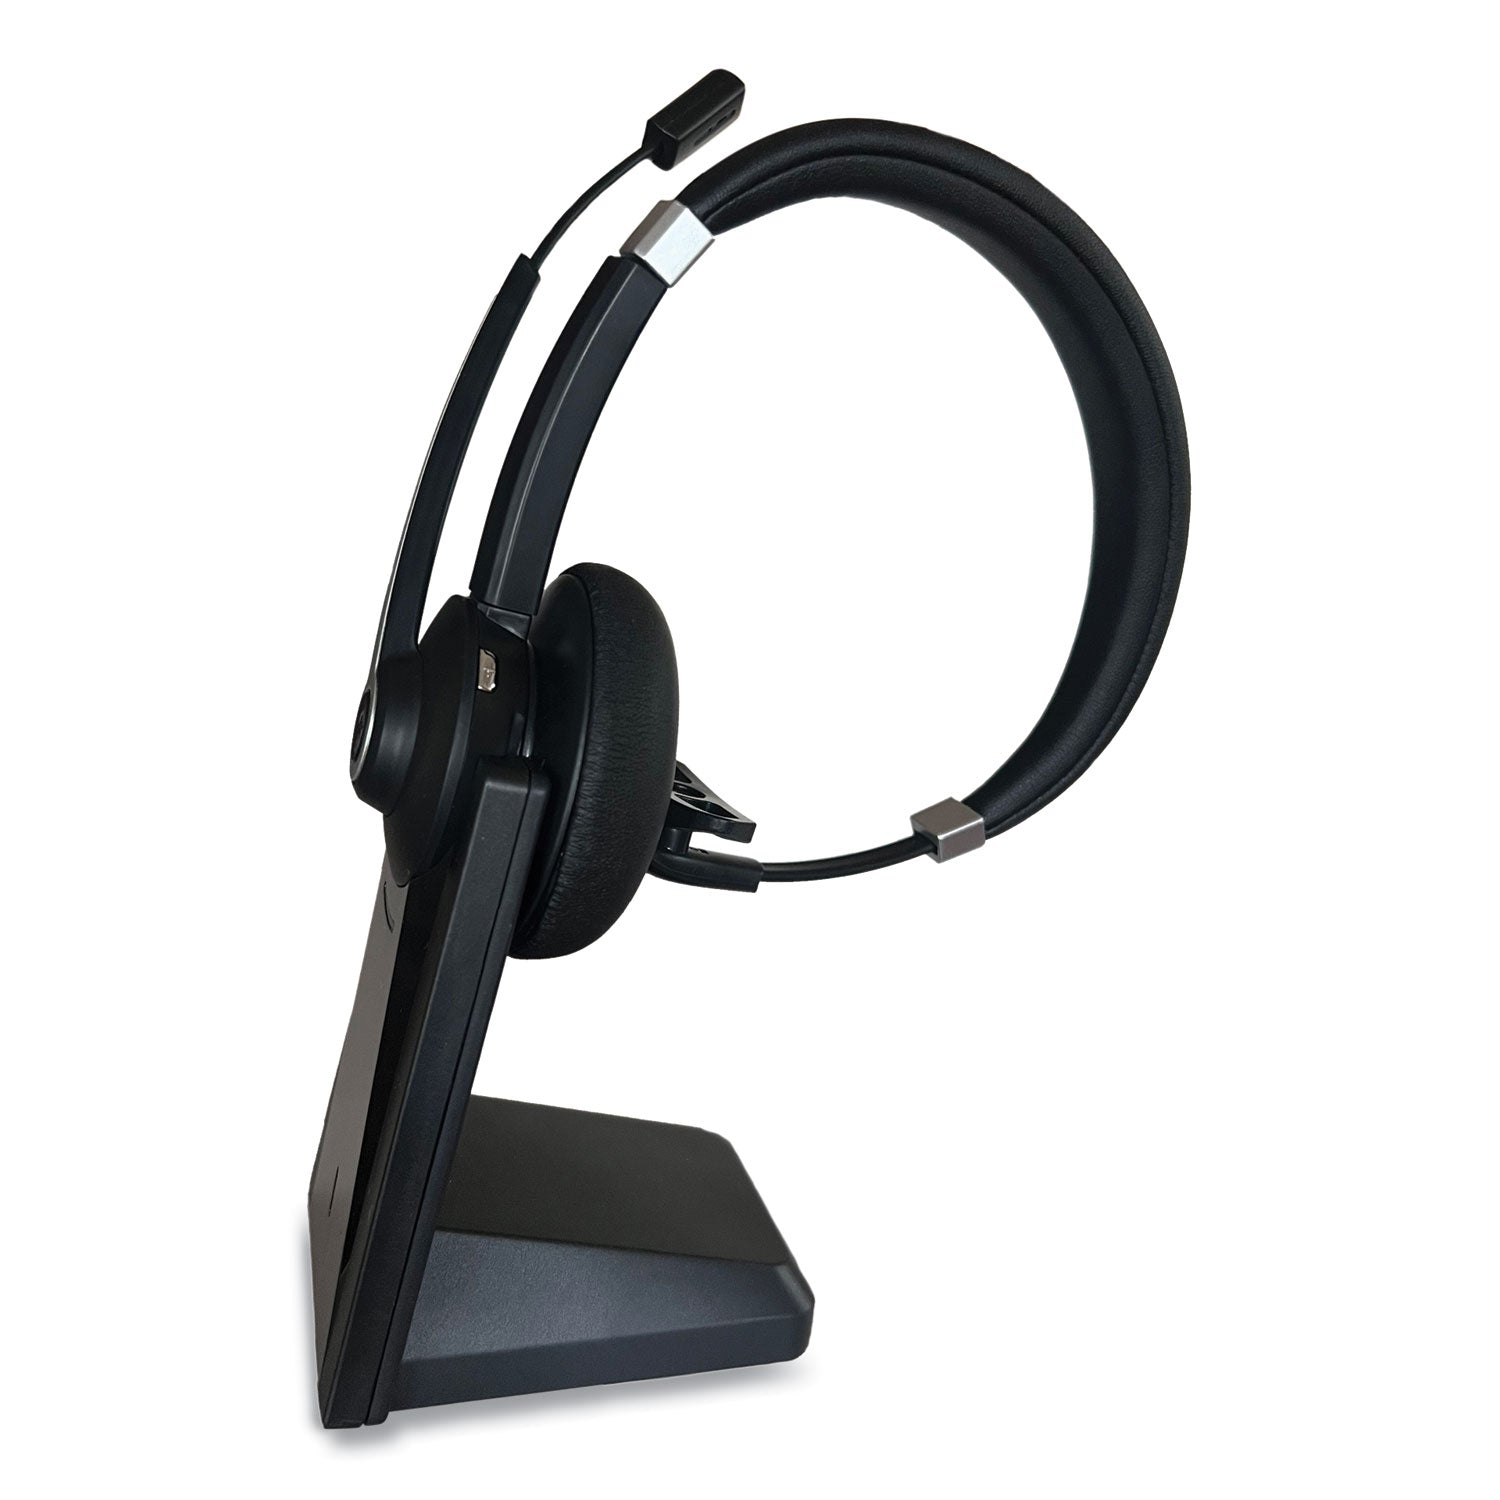 ivr70002-monaural-over-the-head-bluetooth-headset-black-silver_ivr70002 - 1